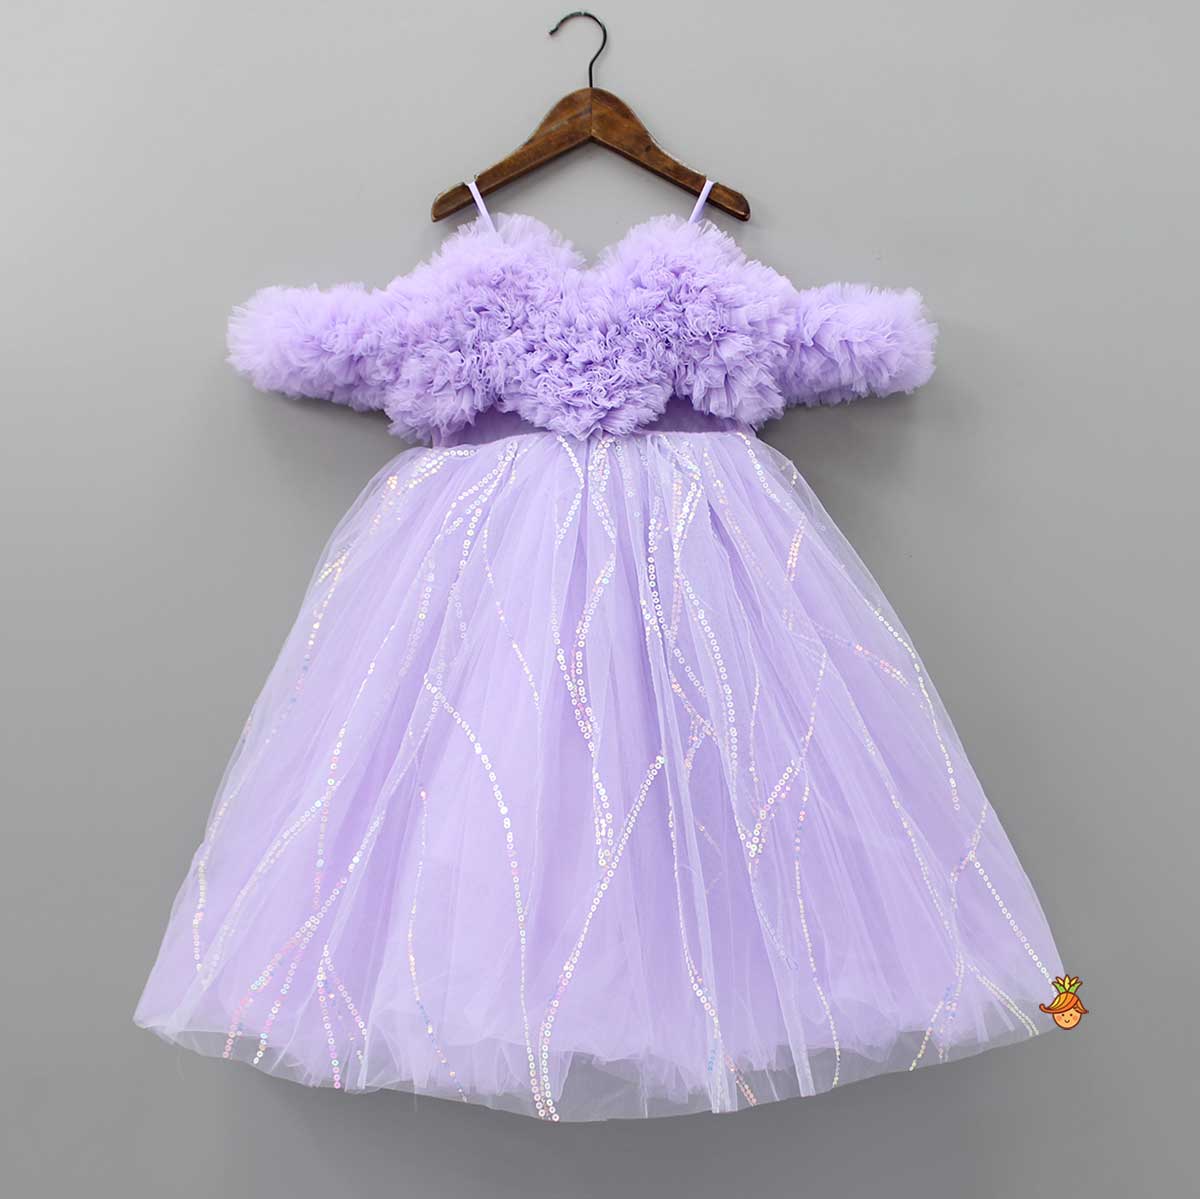 Exquisite Ruffled Lavender Gown With Matching Hair Clip